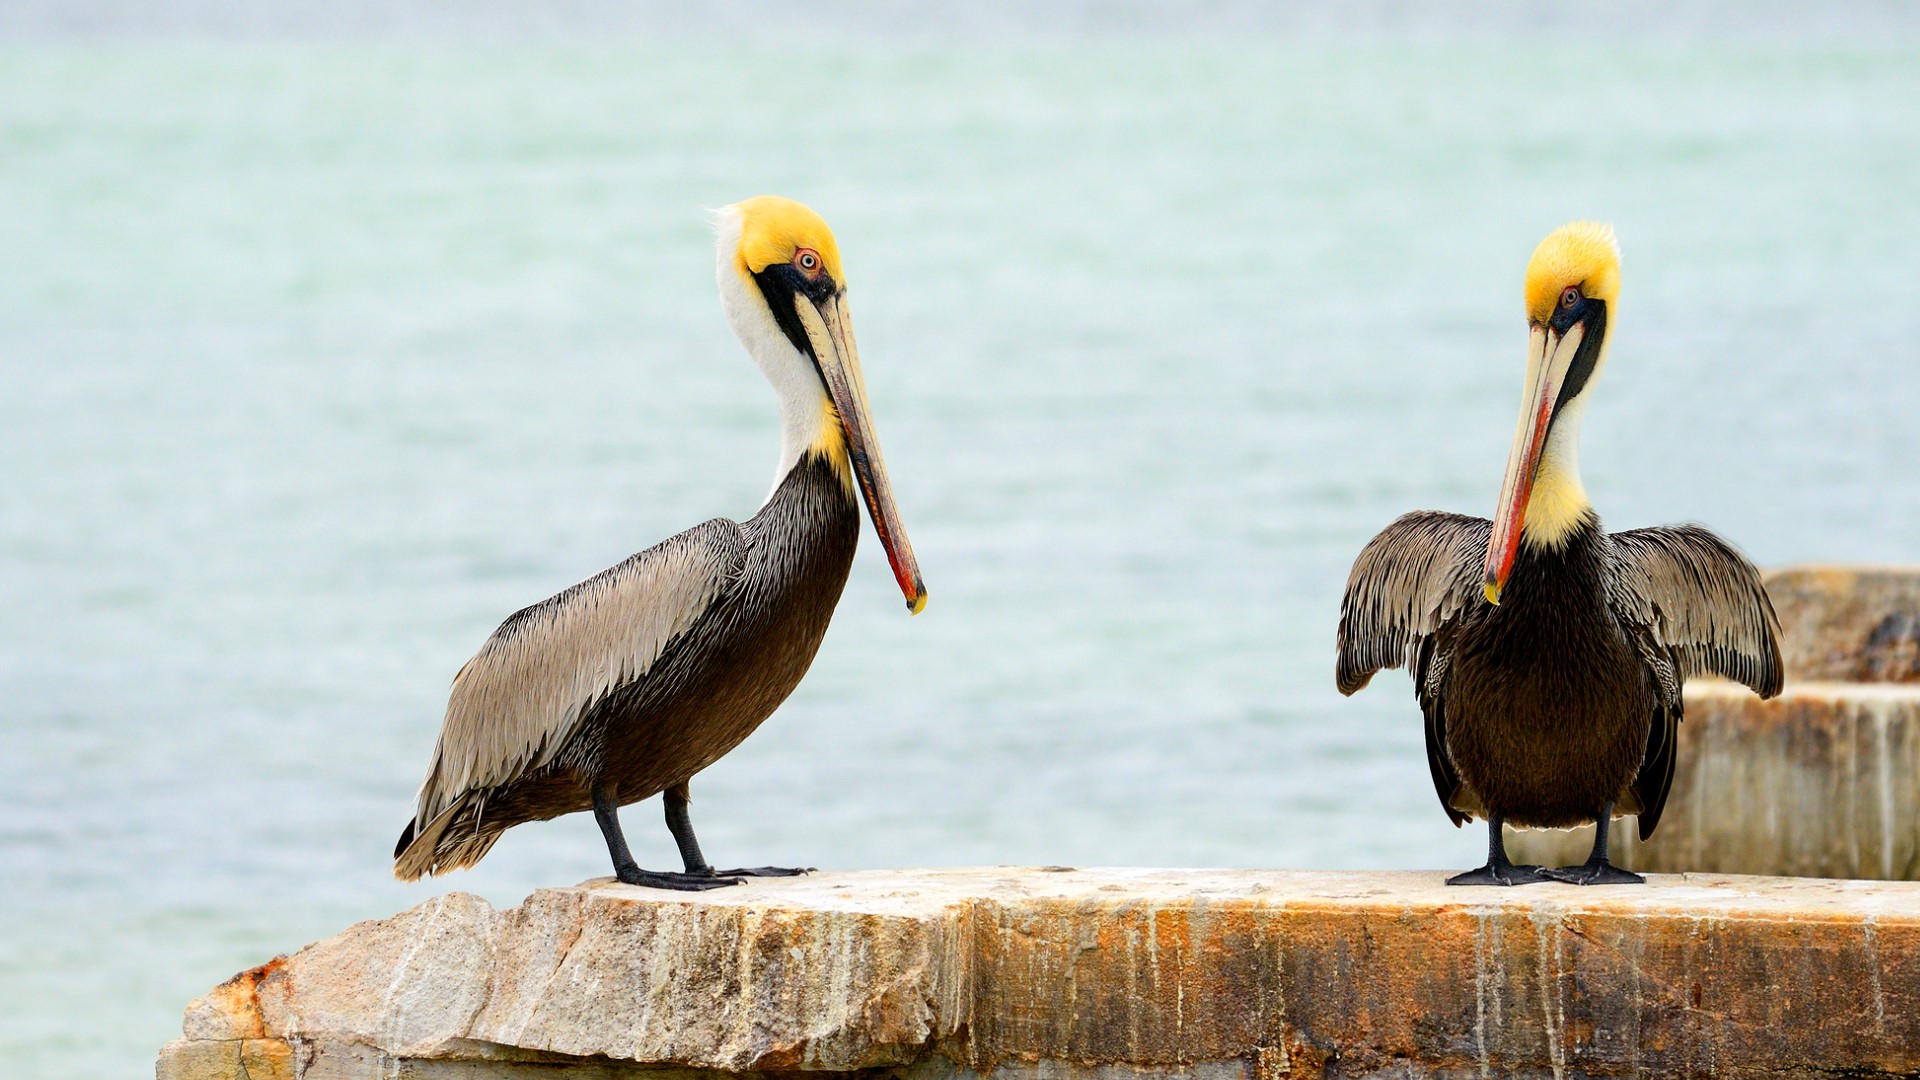 State authorities are looking into who might be behind a series of Pelican deaths reported in Plaquemines and St. Bernard Parish.